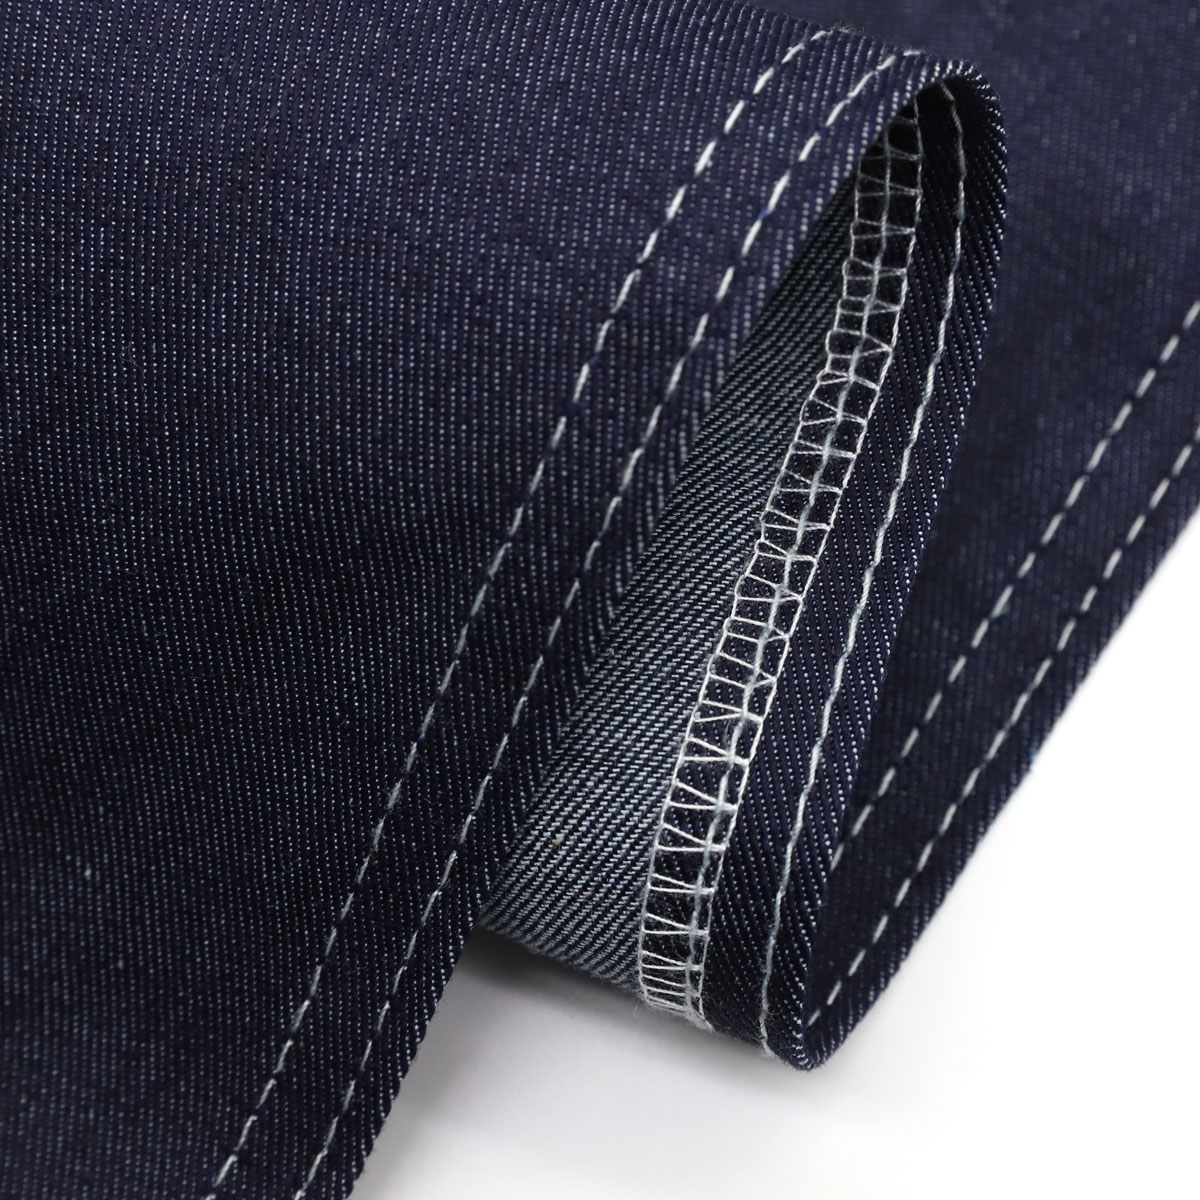 Fabric for Your Denim Jacket 2